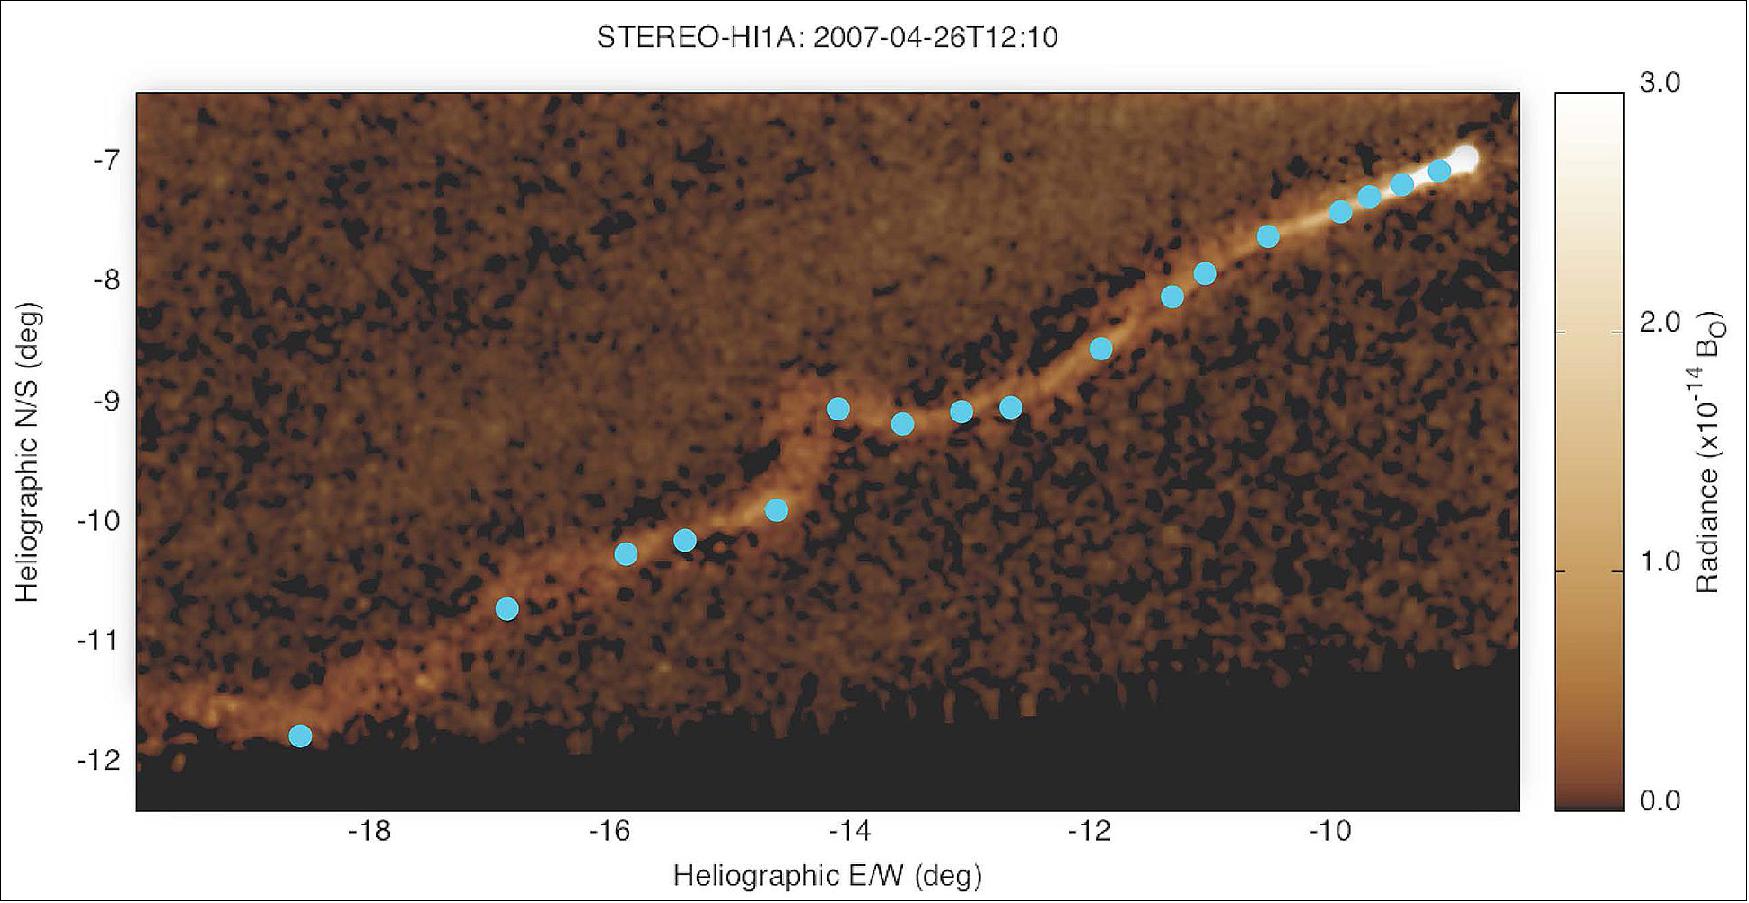 Figure 29: Individual clumps of tail material bob and twist in the turbulent solar wind, in this highly processed image of Comet Encke from the HI-1 instrument on board NASA’s STEREO-A spacecraft. The circular dots mark individual clumps that were tracked by the SwRI/University of Delaware team to measure the flow of the solar wind (image credit: NASA, /SwRI)